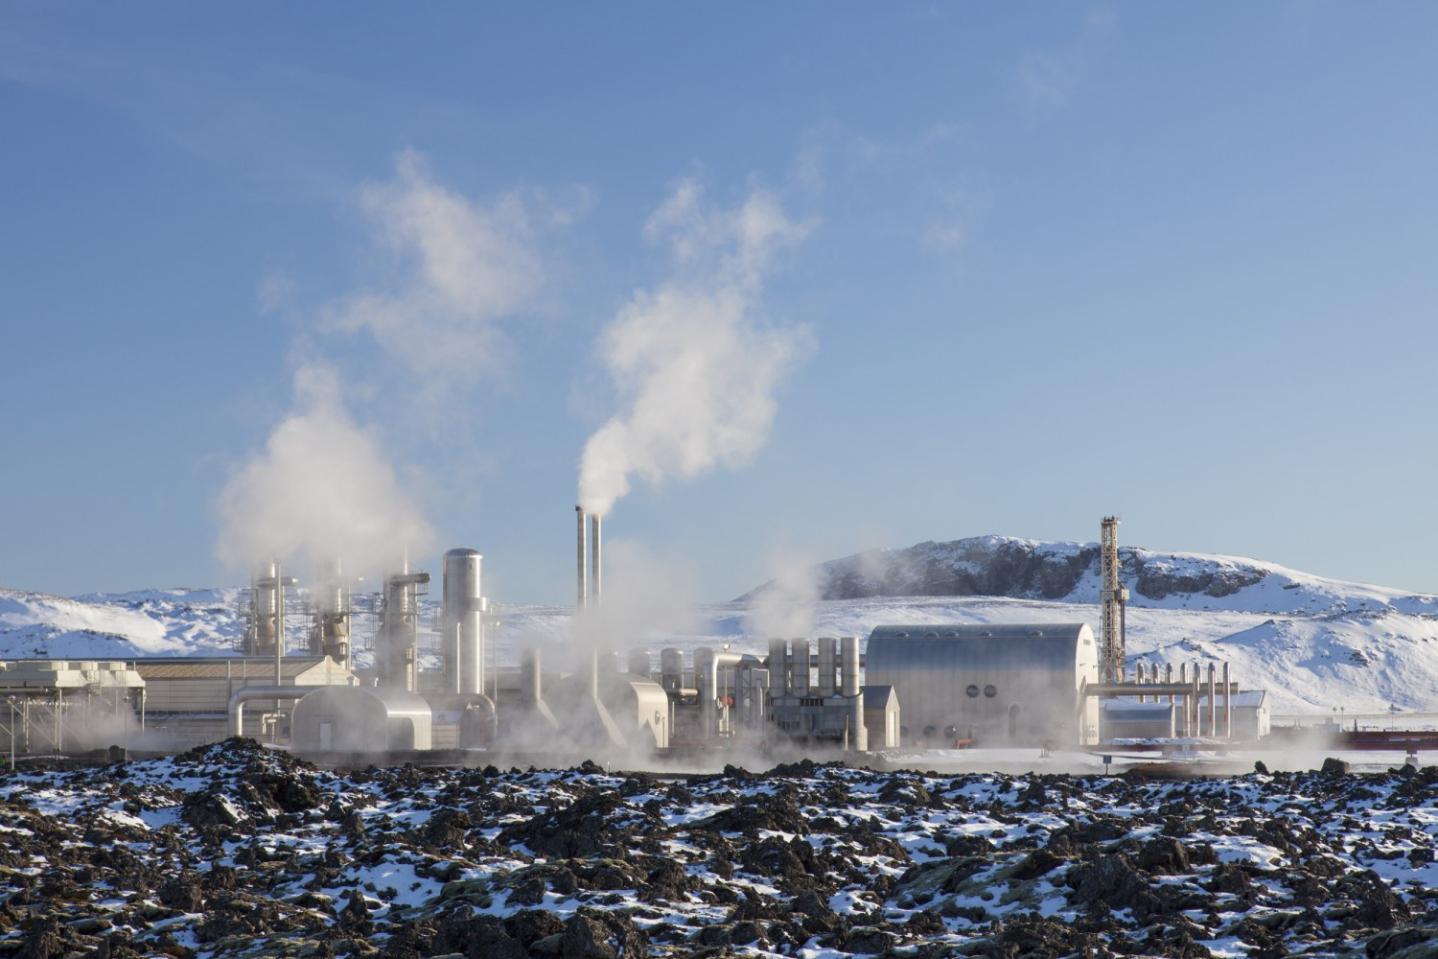 How Can I Invest In Geothermal Energy?